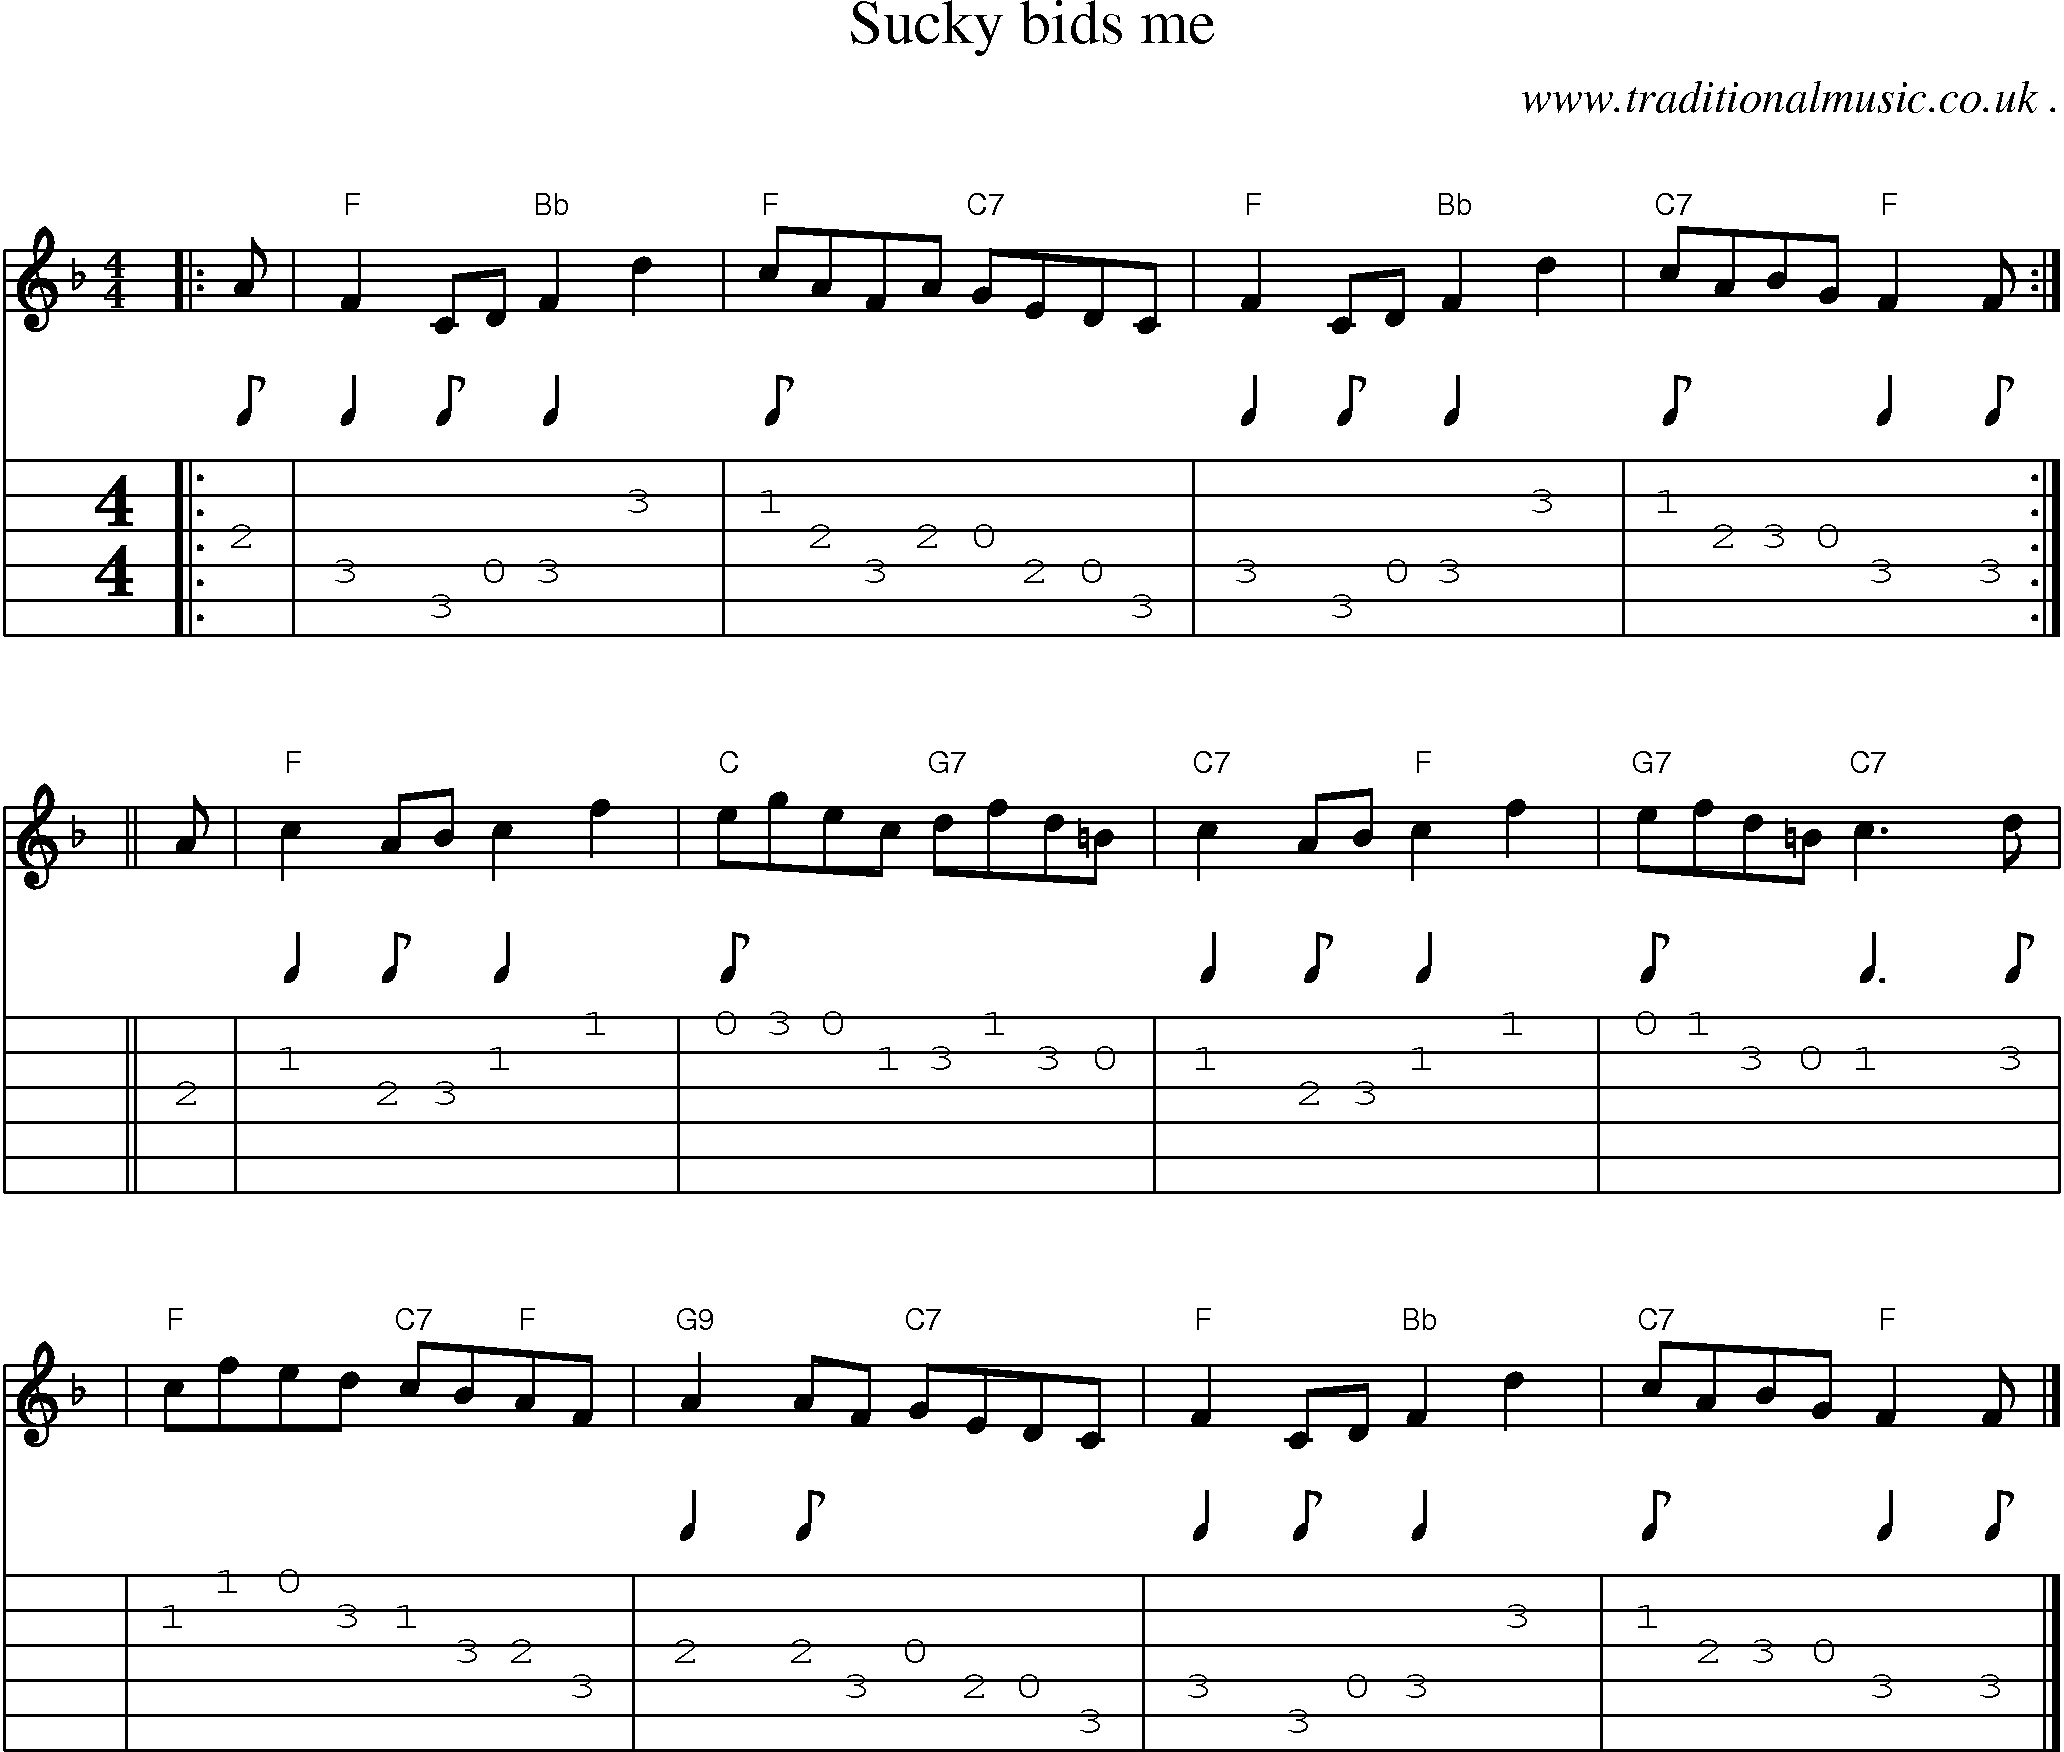 Sheet-music  score, Chords and Guitar Tabs for Sucky Bids Me